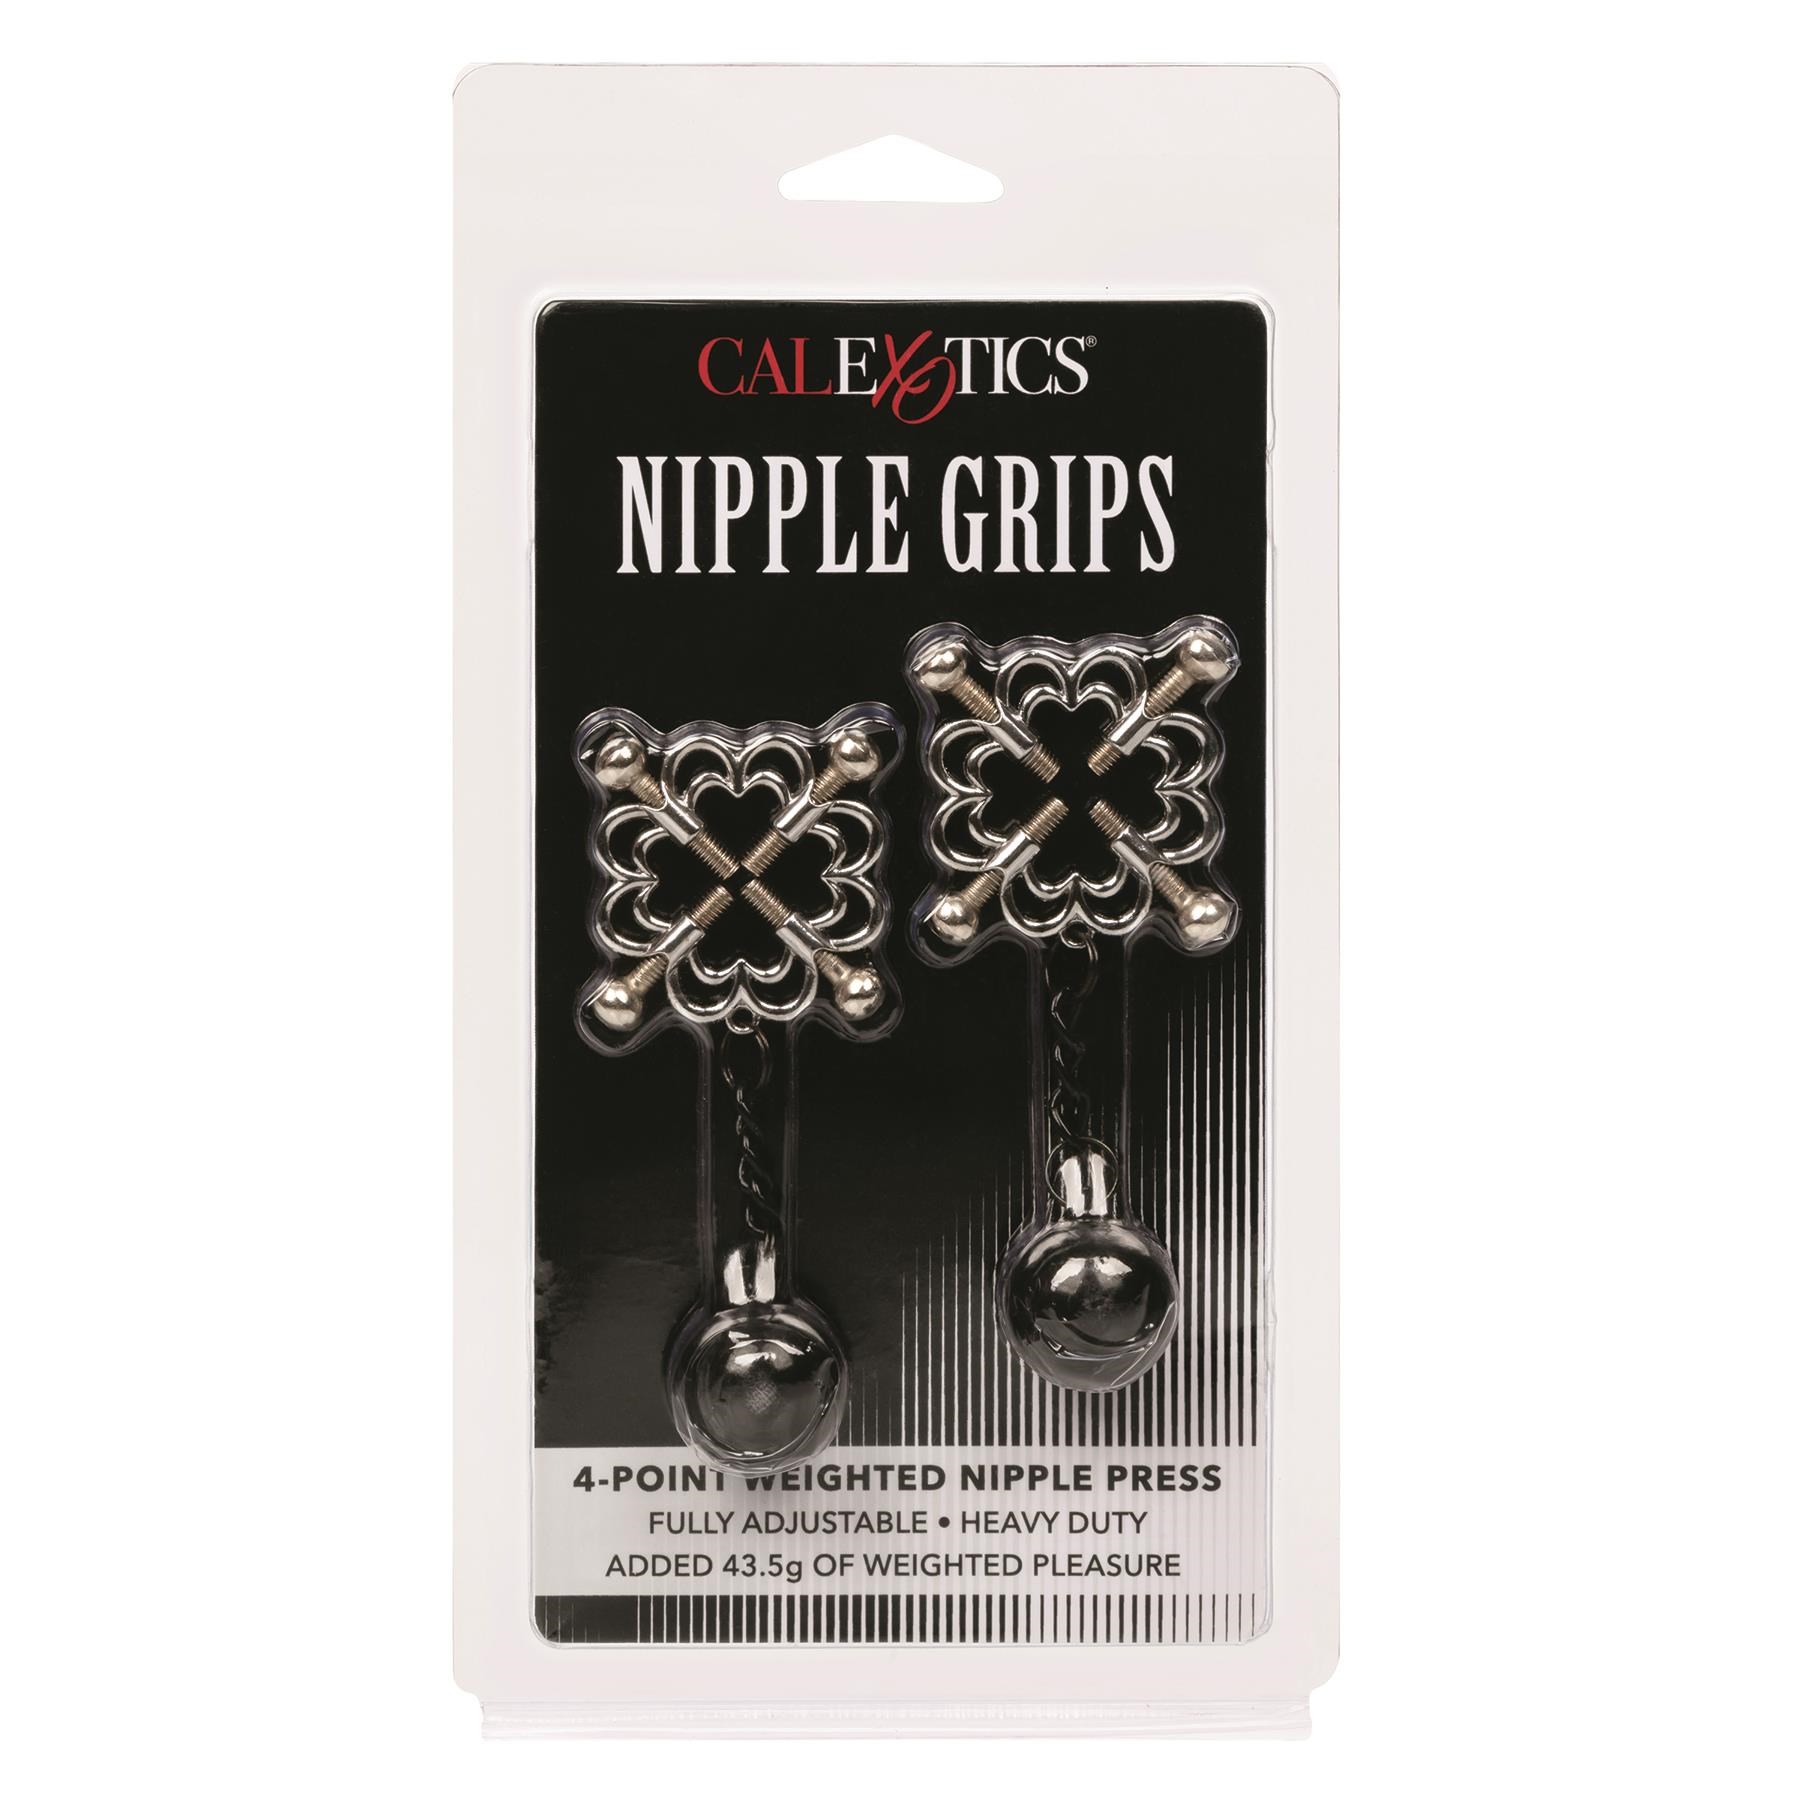 Nipple Grips 4-Point Weighted Nipple Grips Package Shot